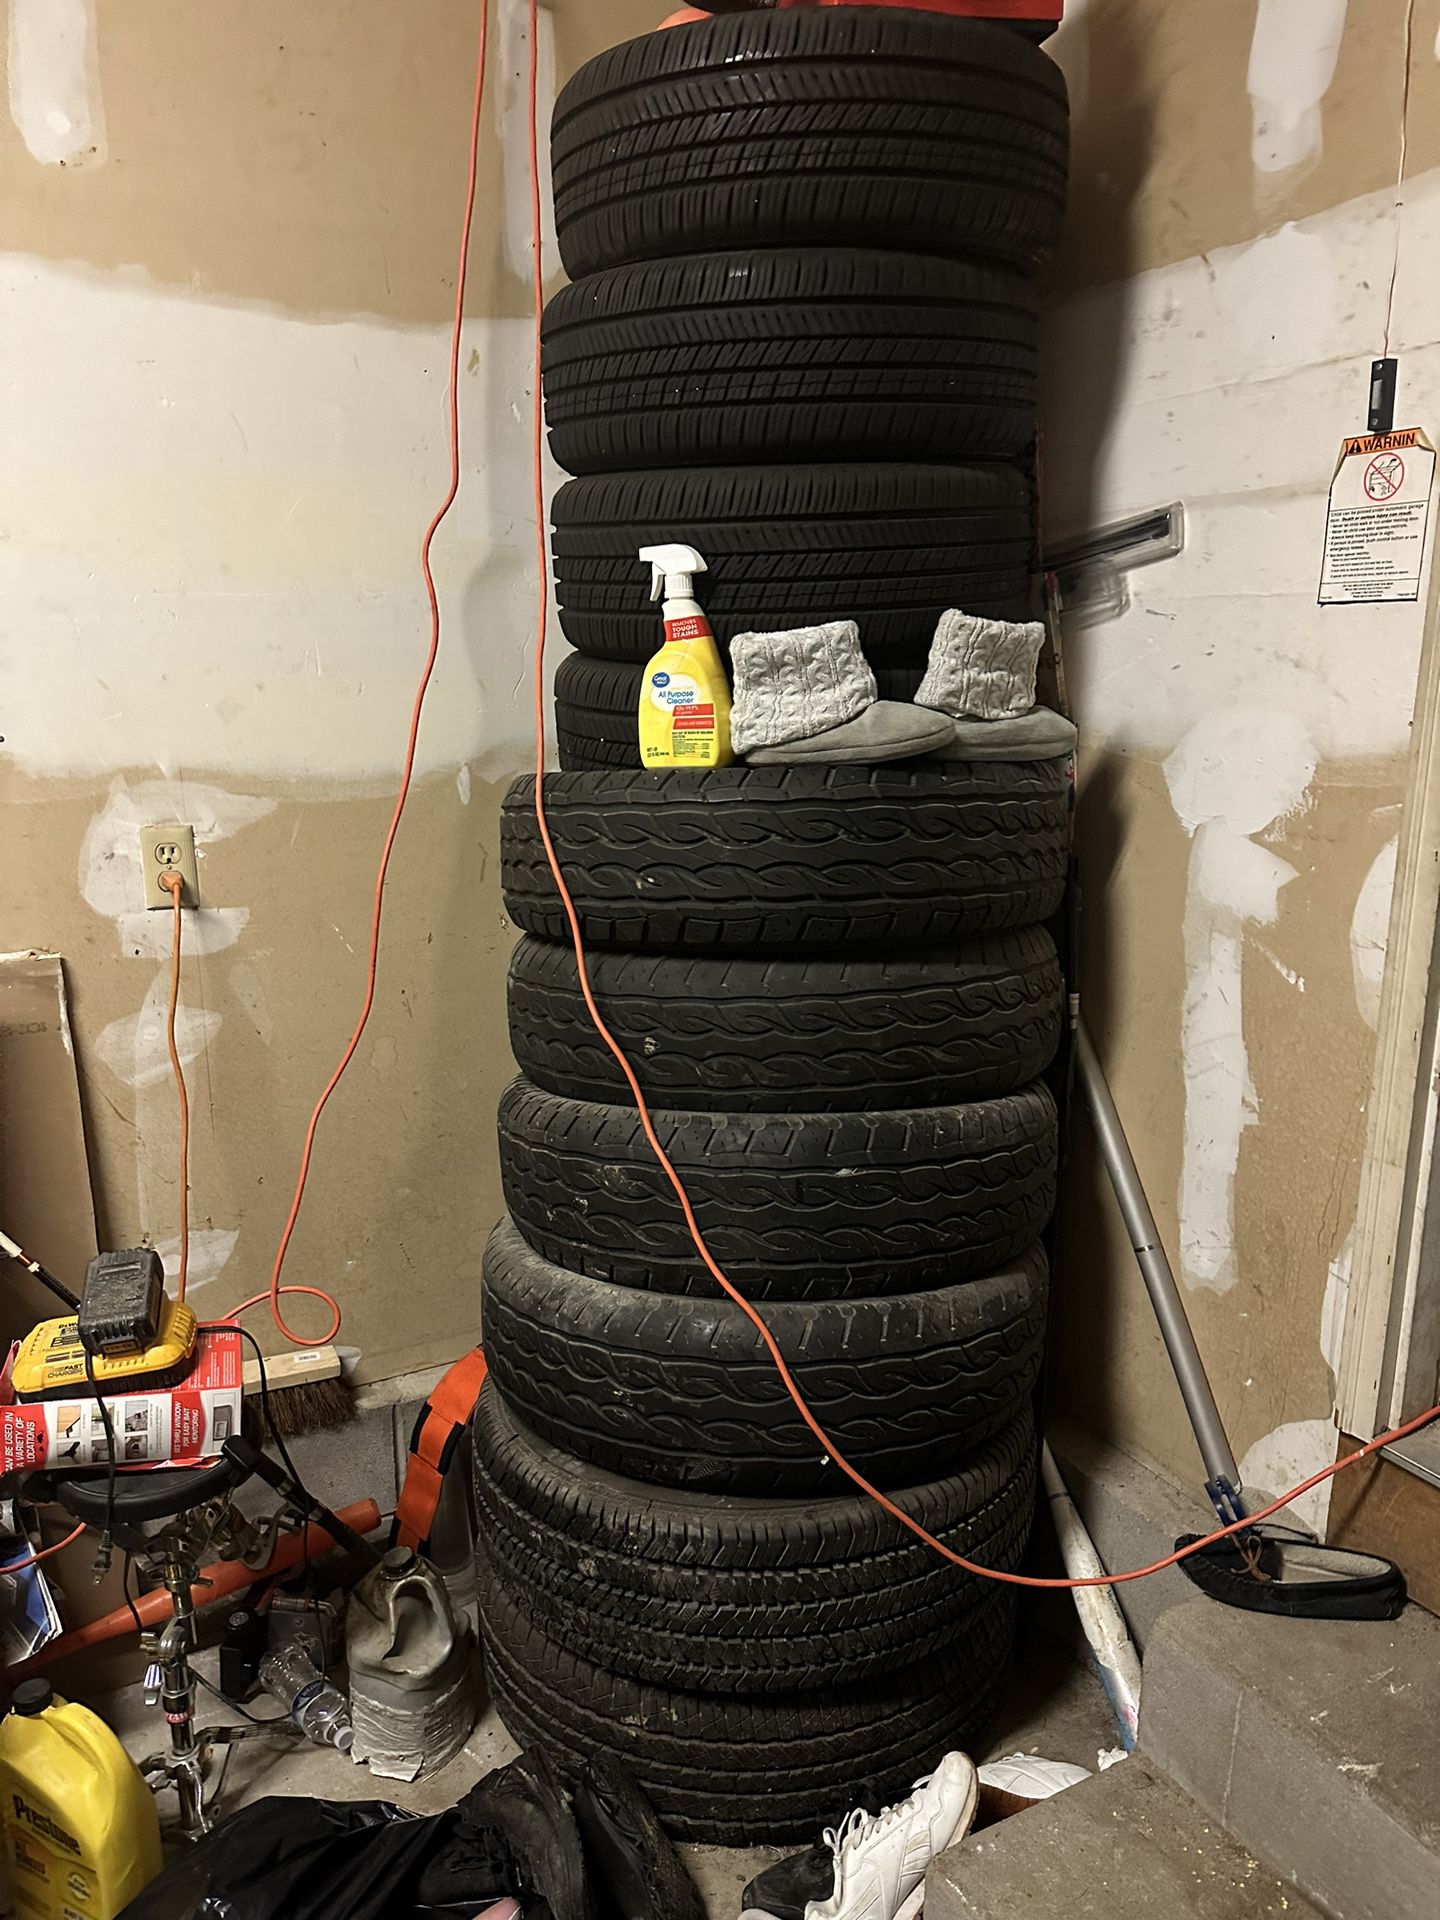 give me an offer for all tires